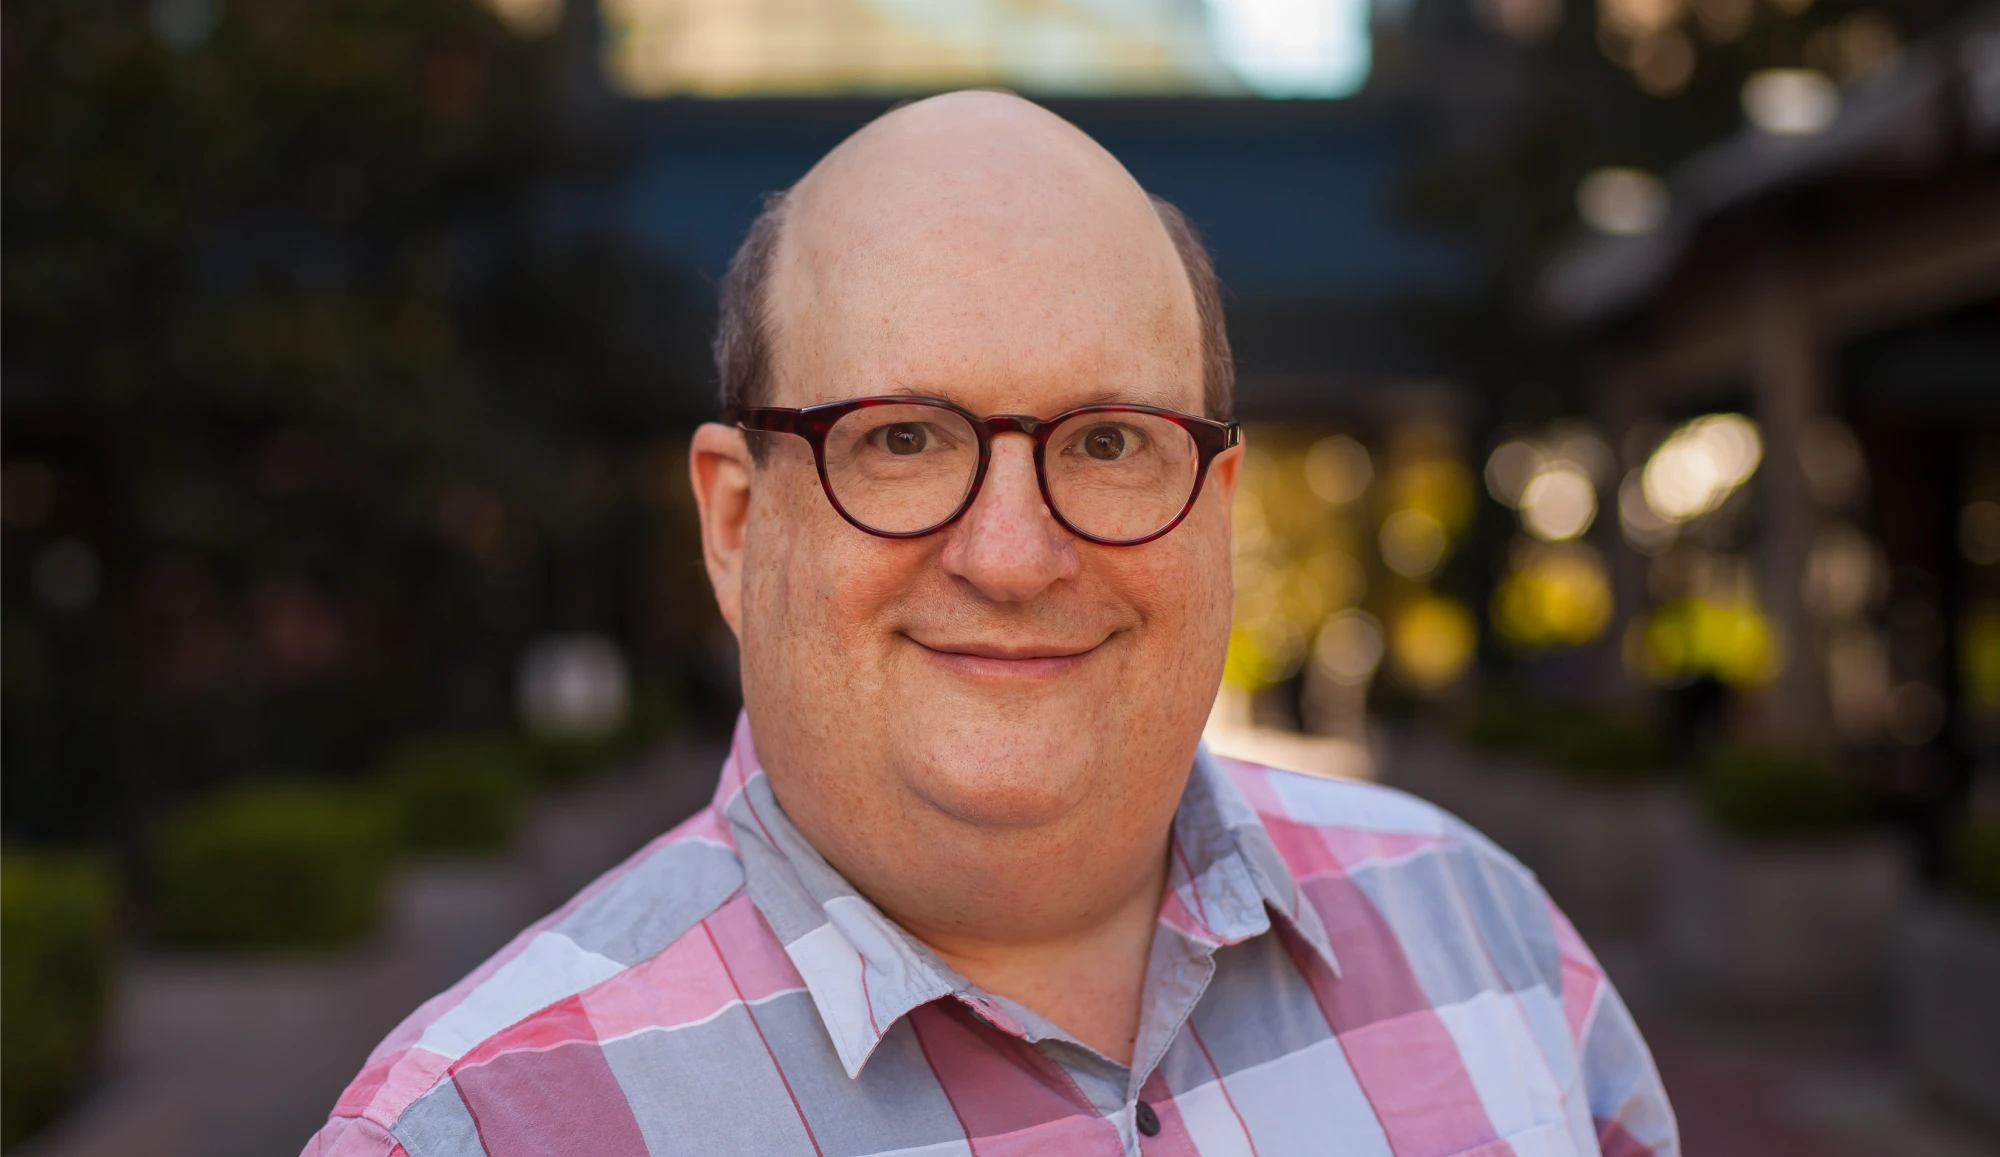 Jared Spool, host of the UX Strategy Leaders Program